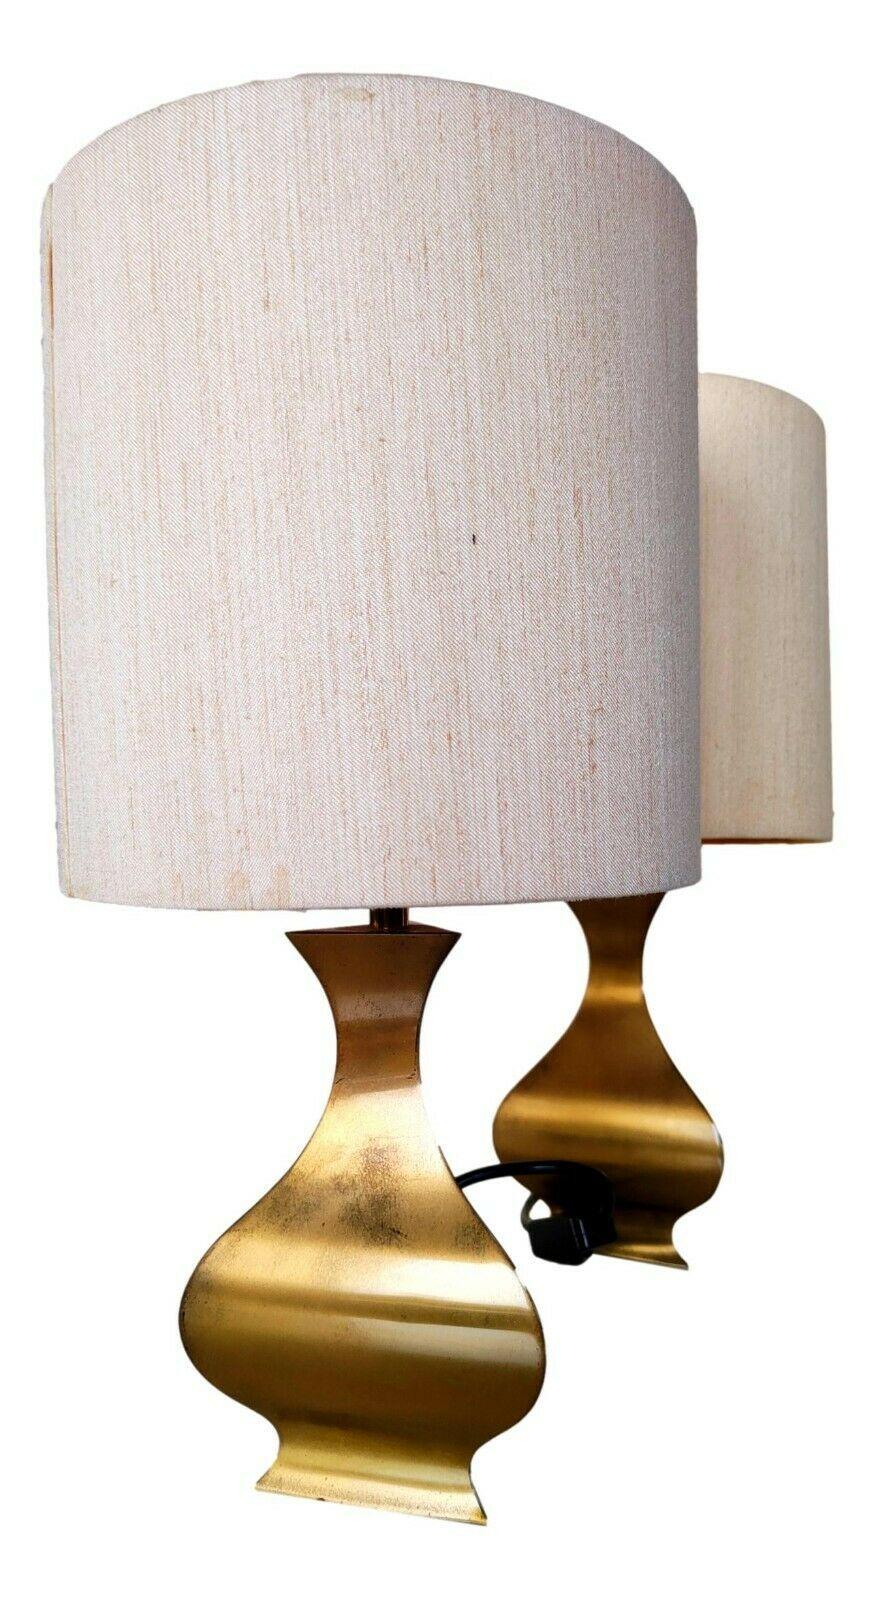 pair of original table lamps from the 70s, High Society production designed by the architects Montagna Grillo and Tonello

Made of brass, with lampshade covered in sand-colored fabric, they measure 43 cm in total height, 25 cm only for the lamp